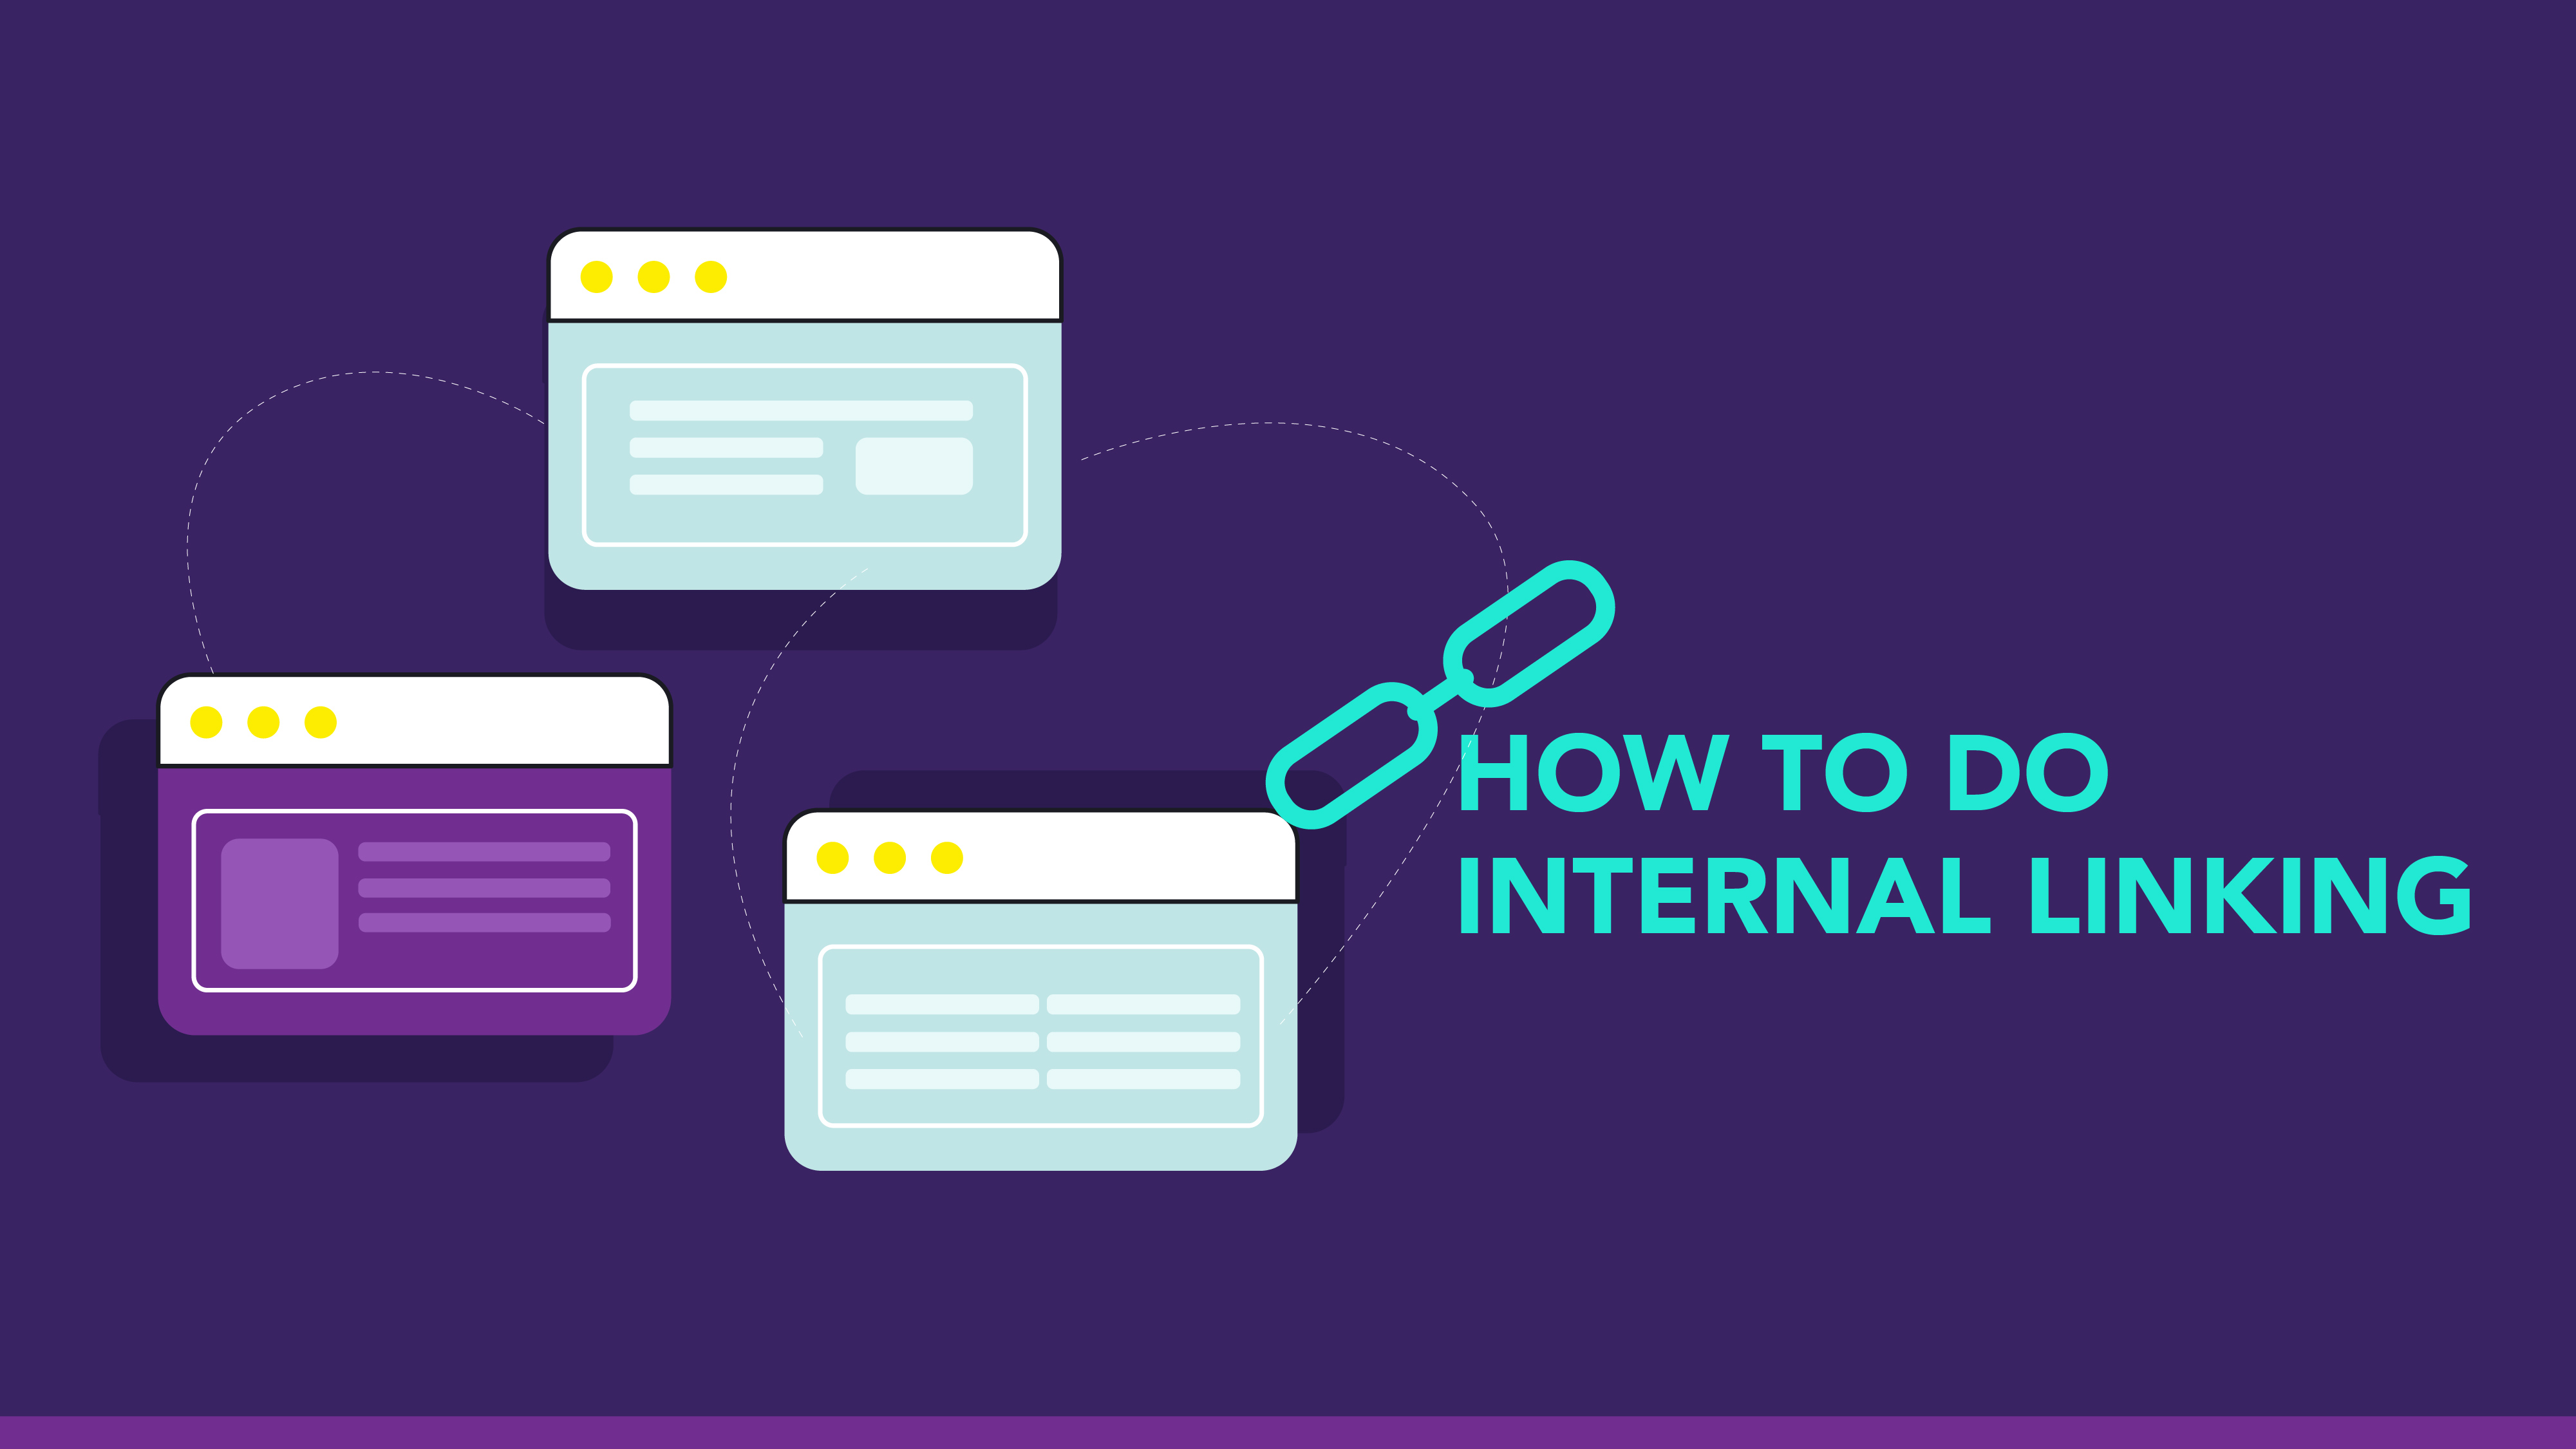 How To Do Internal Linking